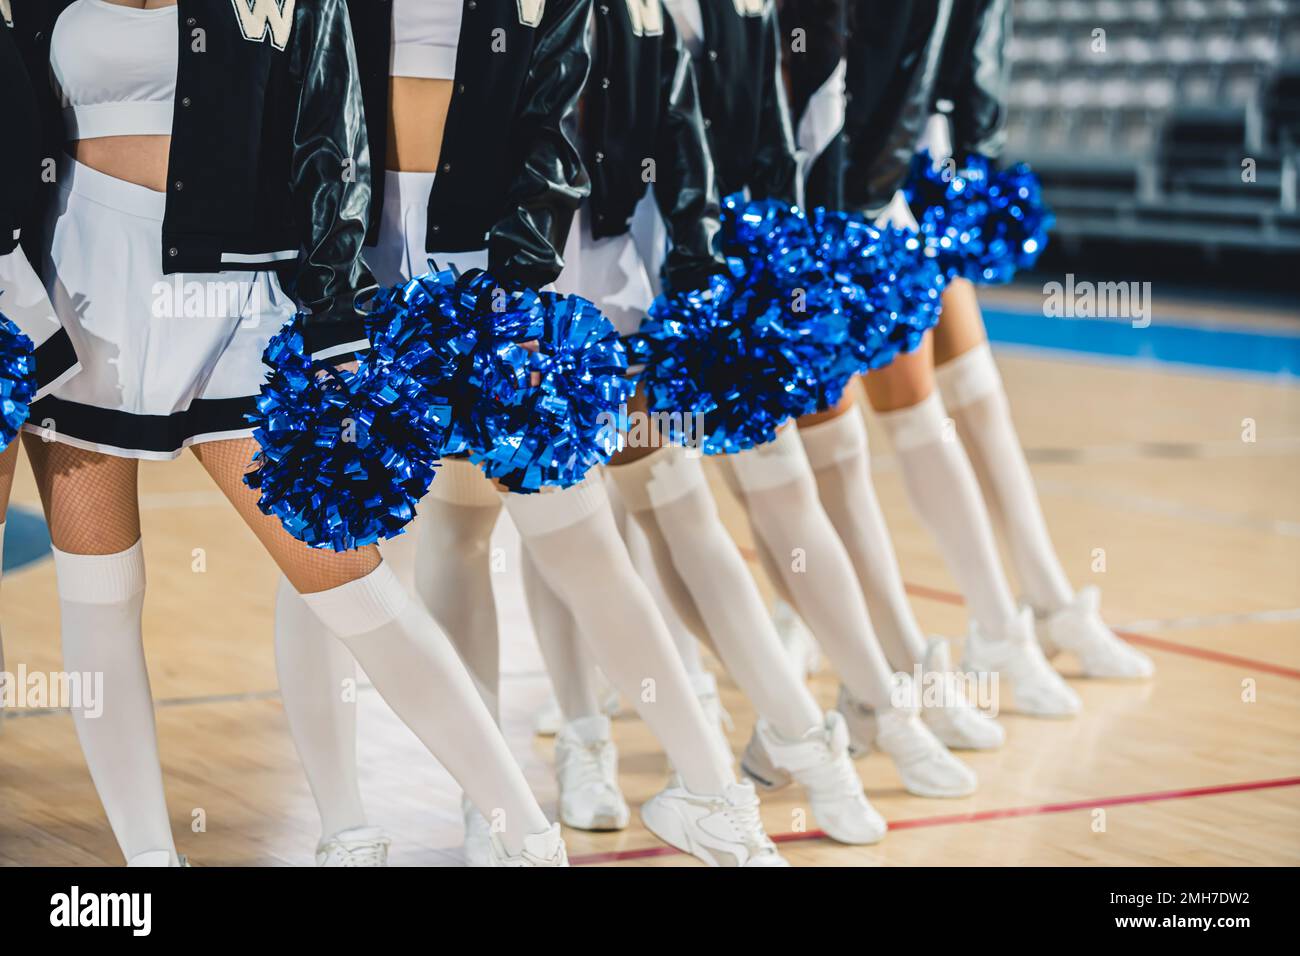 Medium full shot of cheerleaders wearing white stockings and shoes posing in line with blue pompoms in their hands. High quality photo Stock Photo